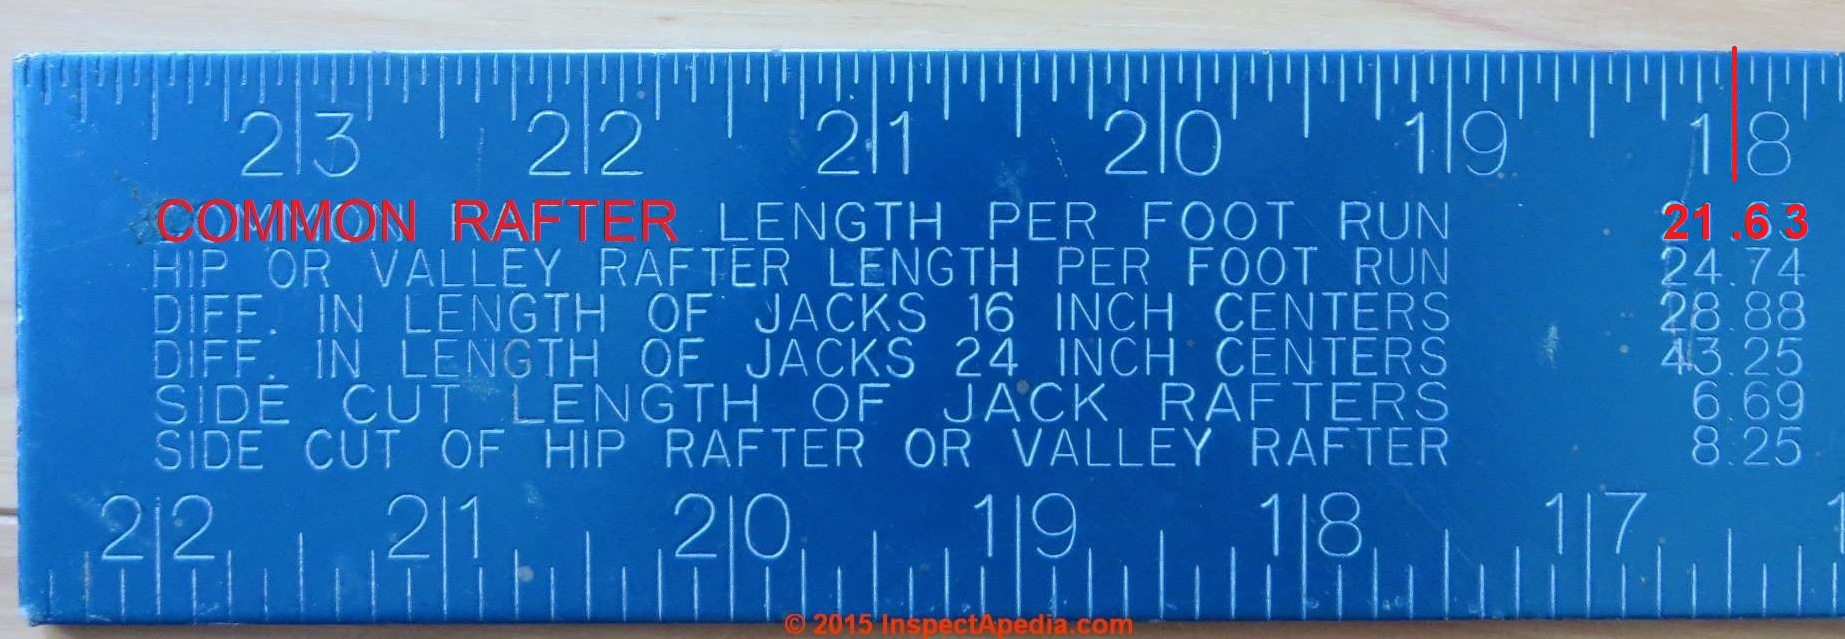 Swanson Rafter Length Chart